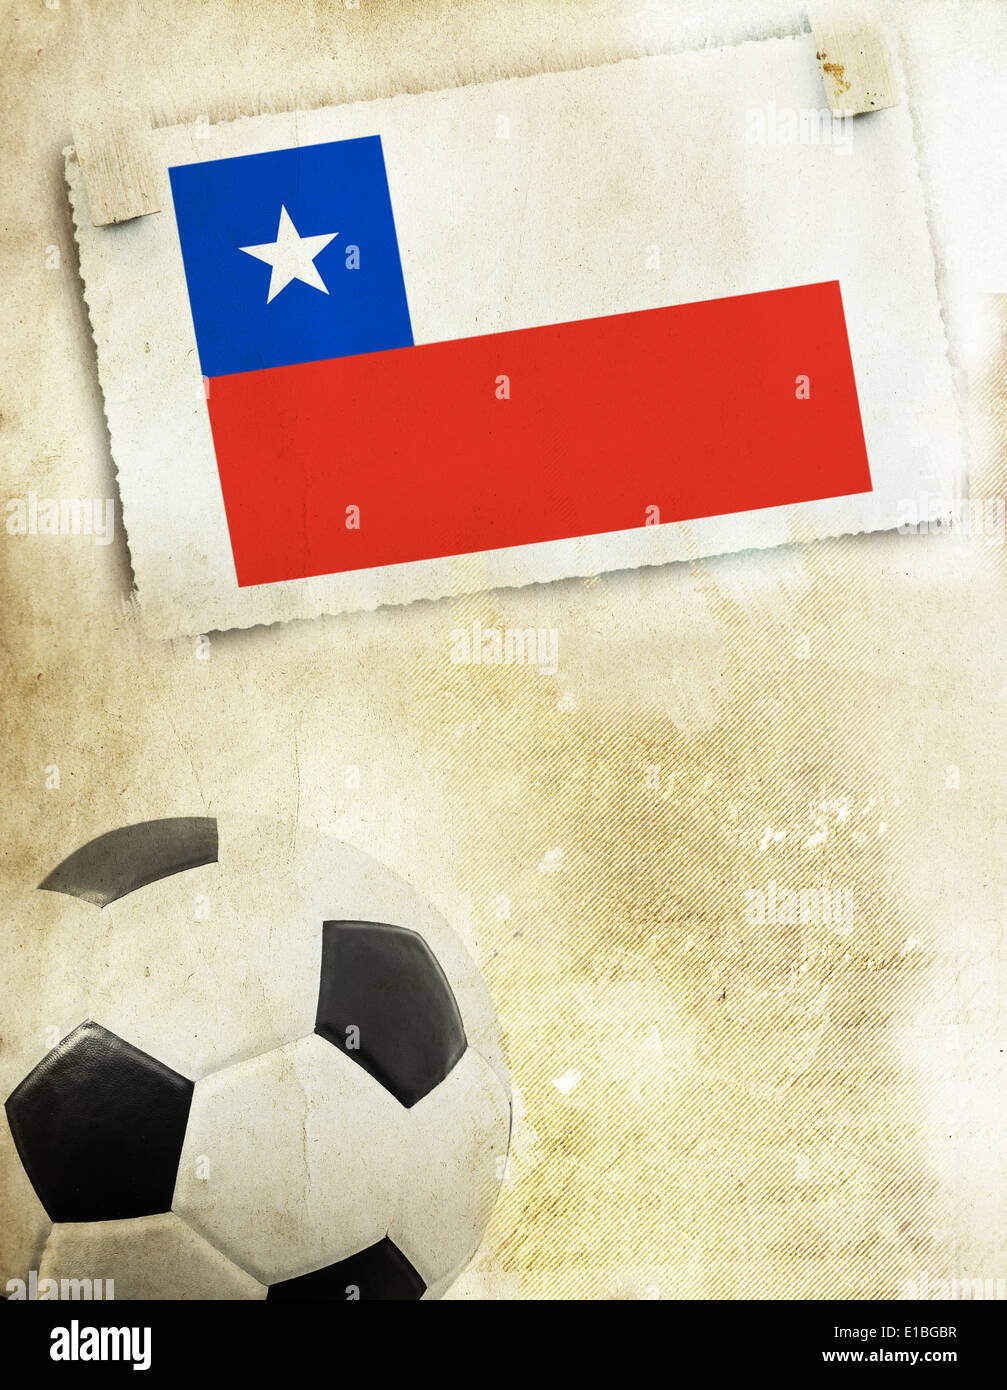 Vintage photo of Chile flag and soccer ball Stock Photo